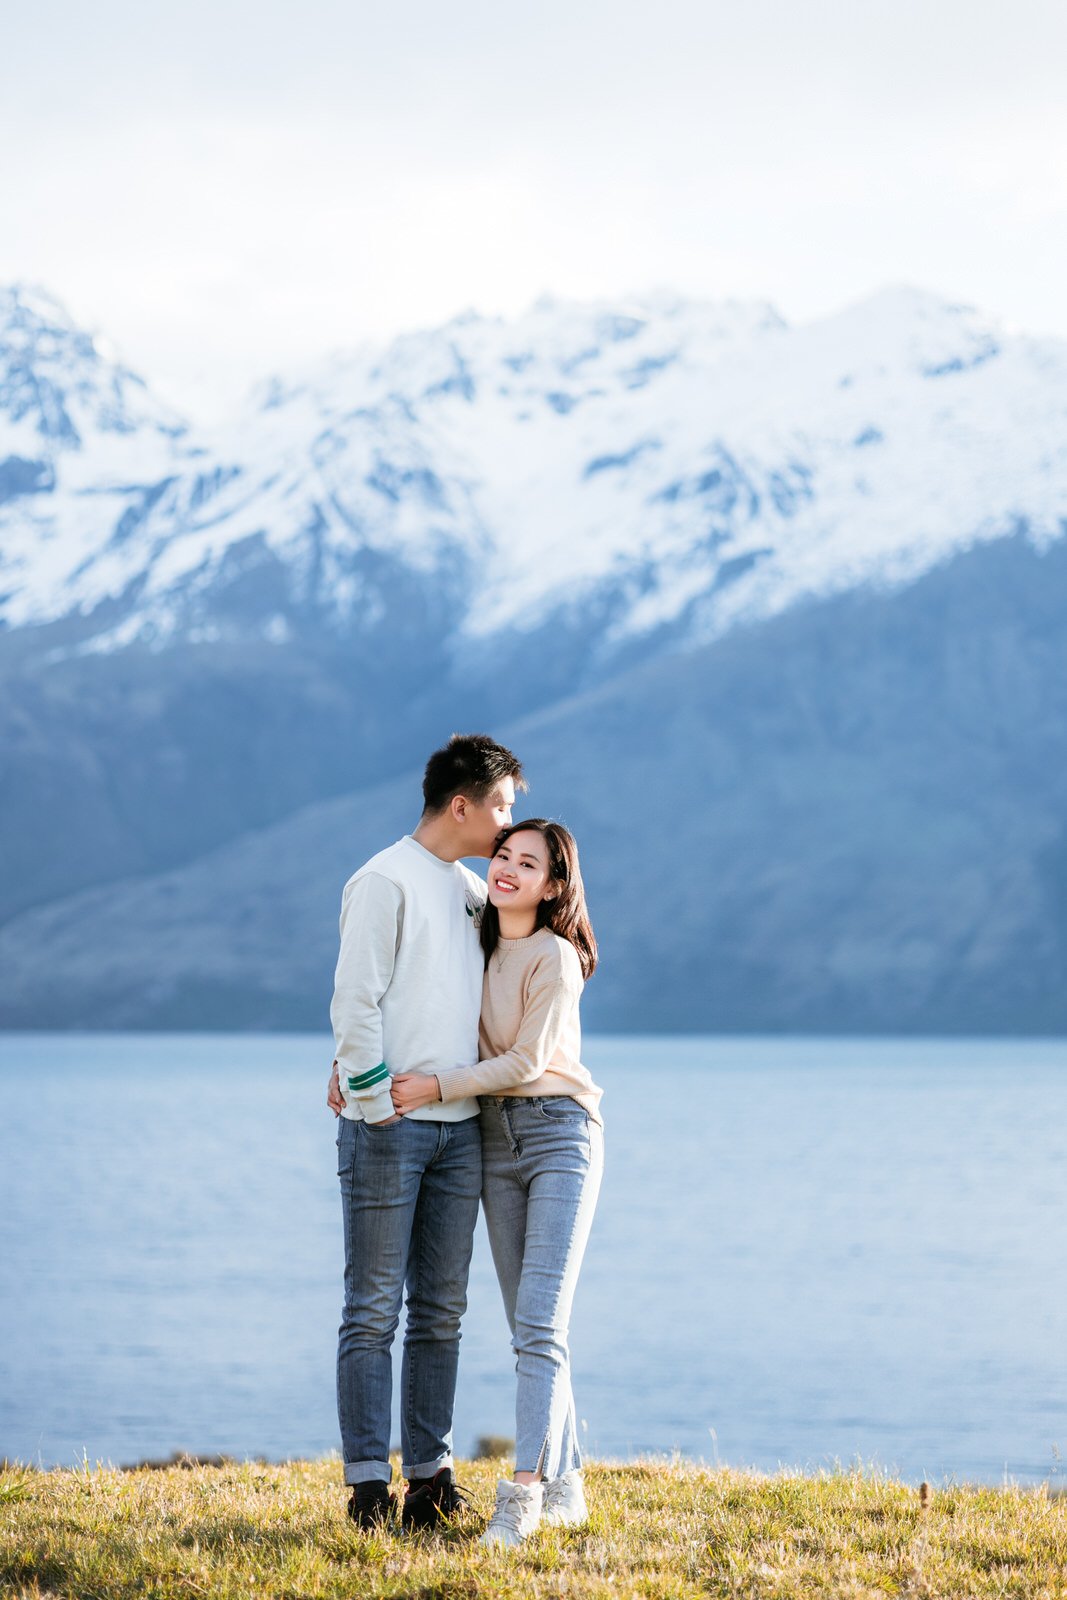 Queenstown couple photography photographer New Zealand engagement proposal IMGL7051.jpg